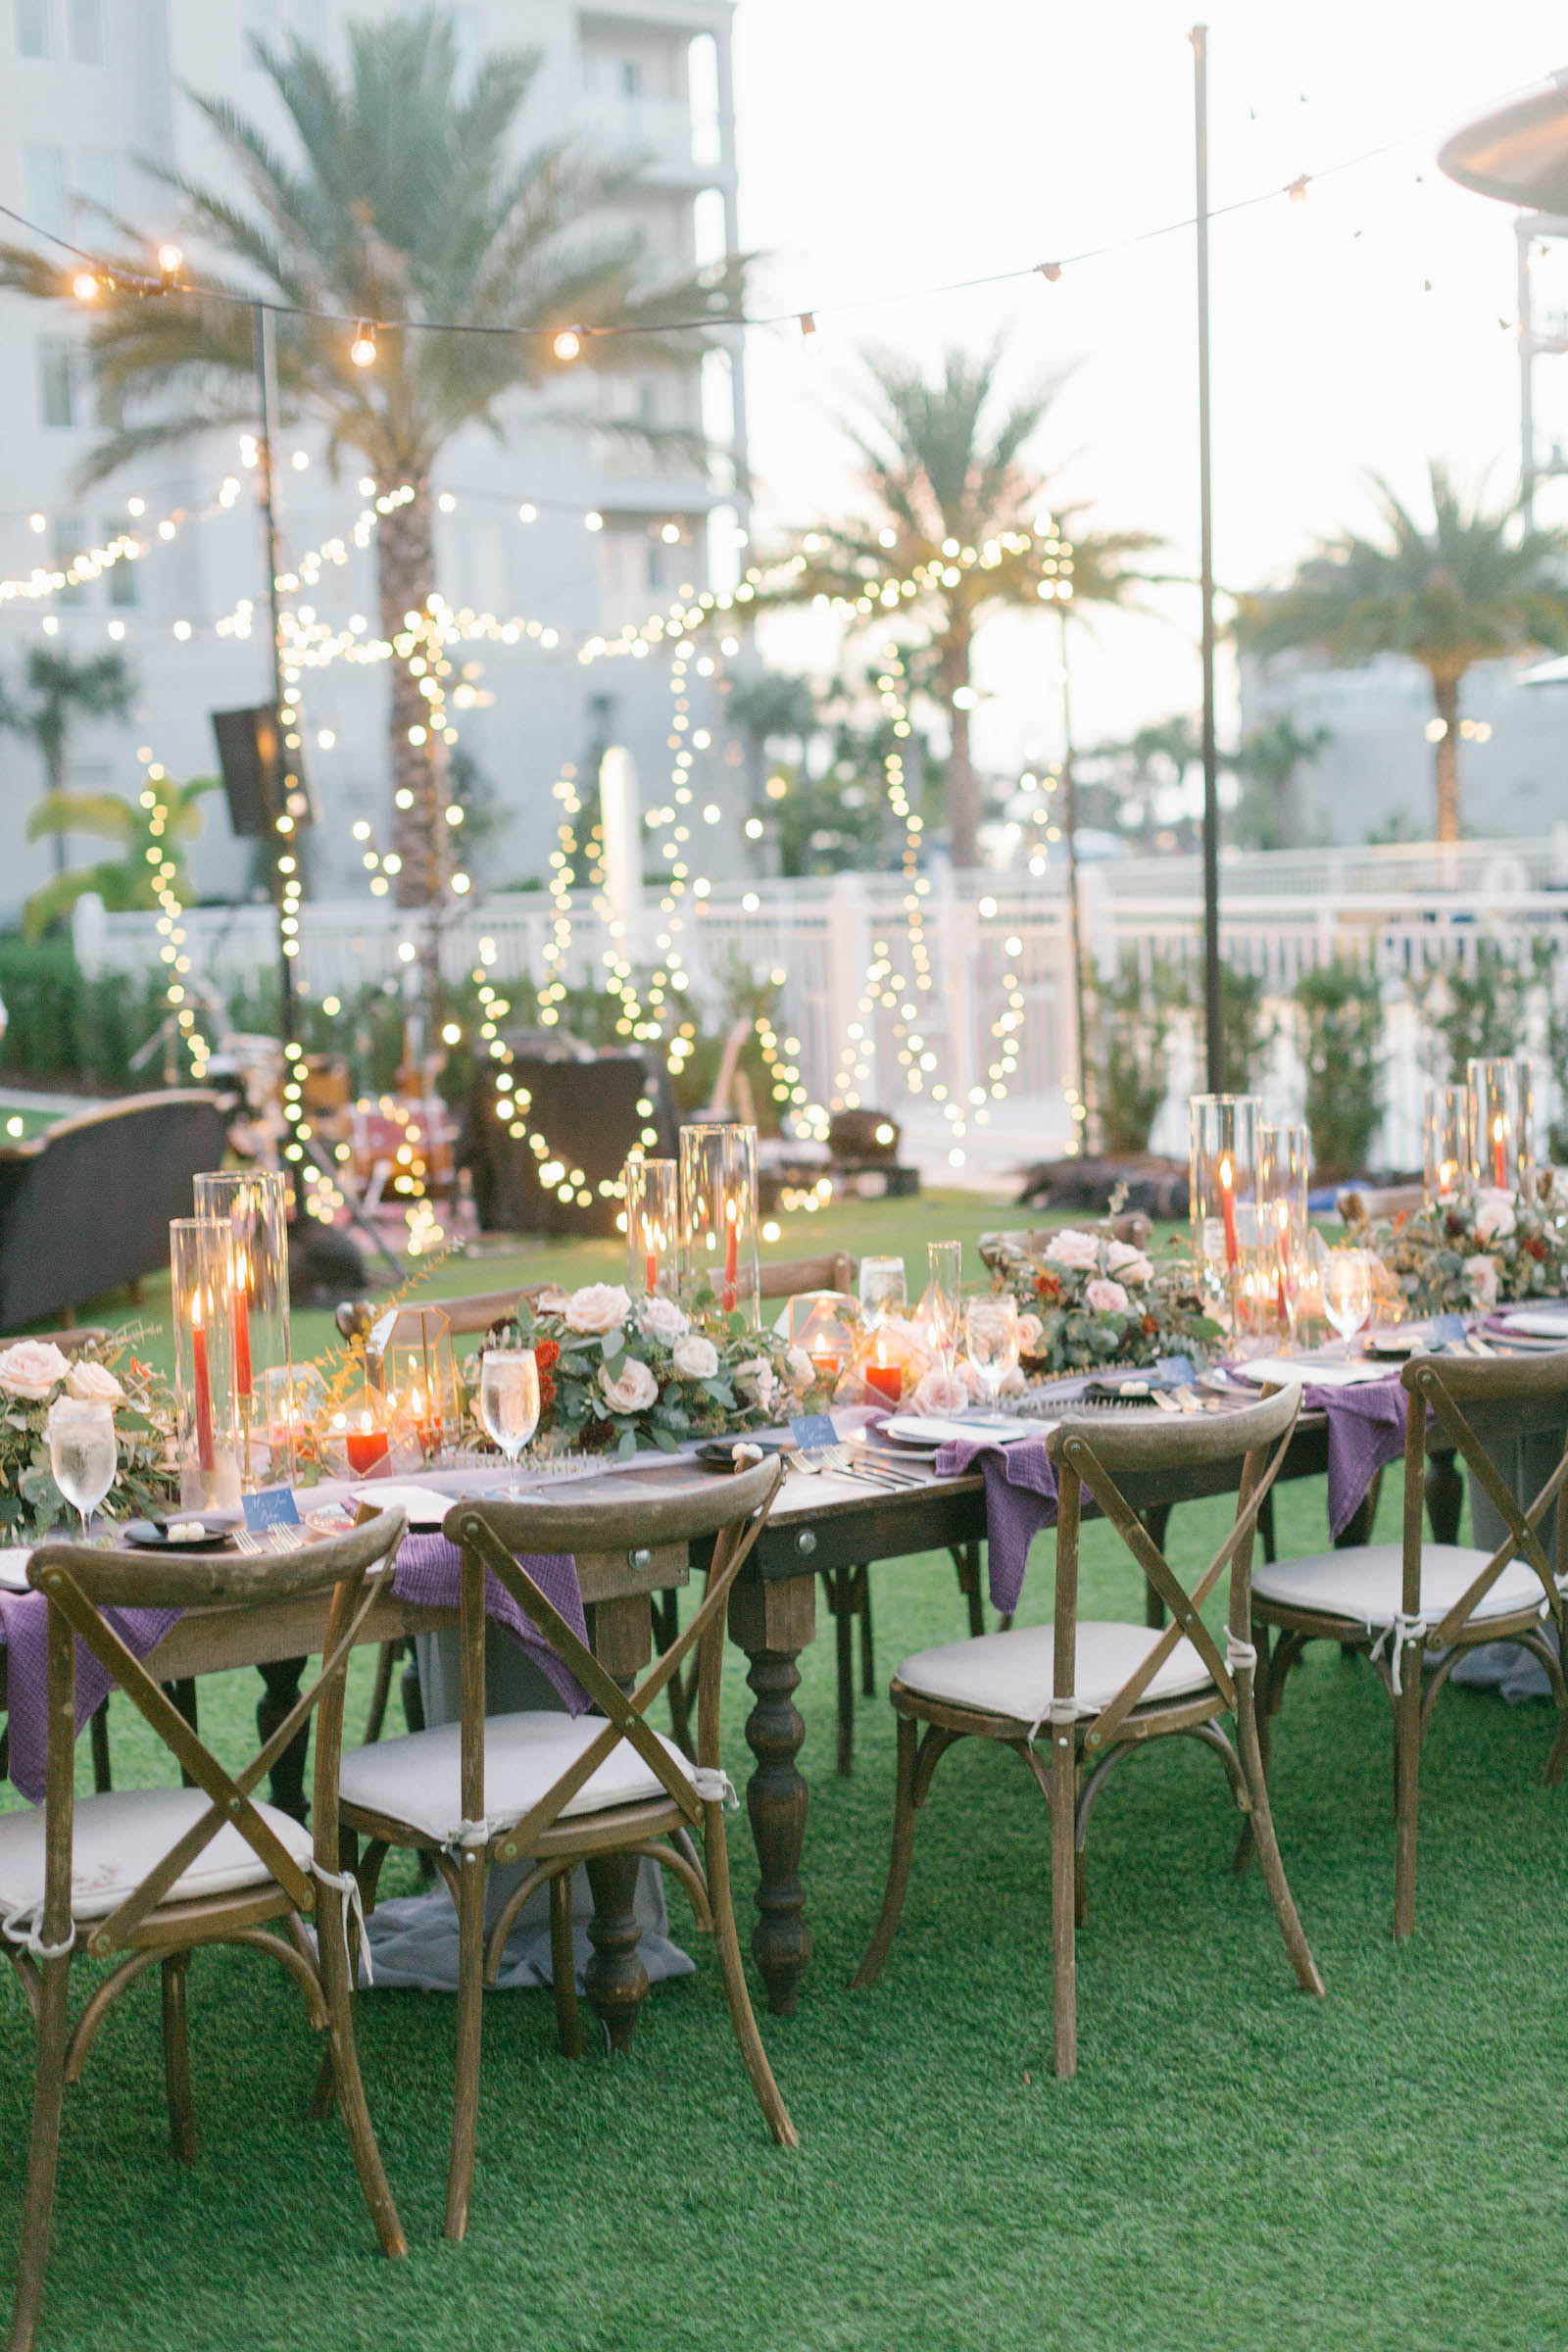 Boho Garden Wedding Reception Decor, Long Wooden Feasting Table with Wooden Cross Back Chairs, String Lights, Purple Linen Table Runner with Greenery Garland, Red Candlesticks, Gold Geometric Vases, White Roses | Tampa Bay Wedding Planner Parties A'la Carte | Florida Wedding Venue Belleview Inn